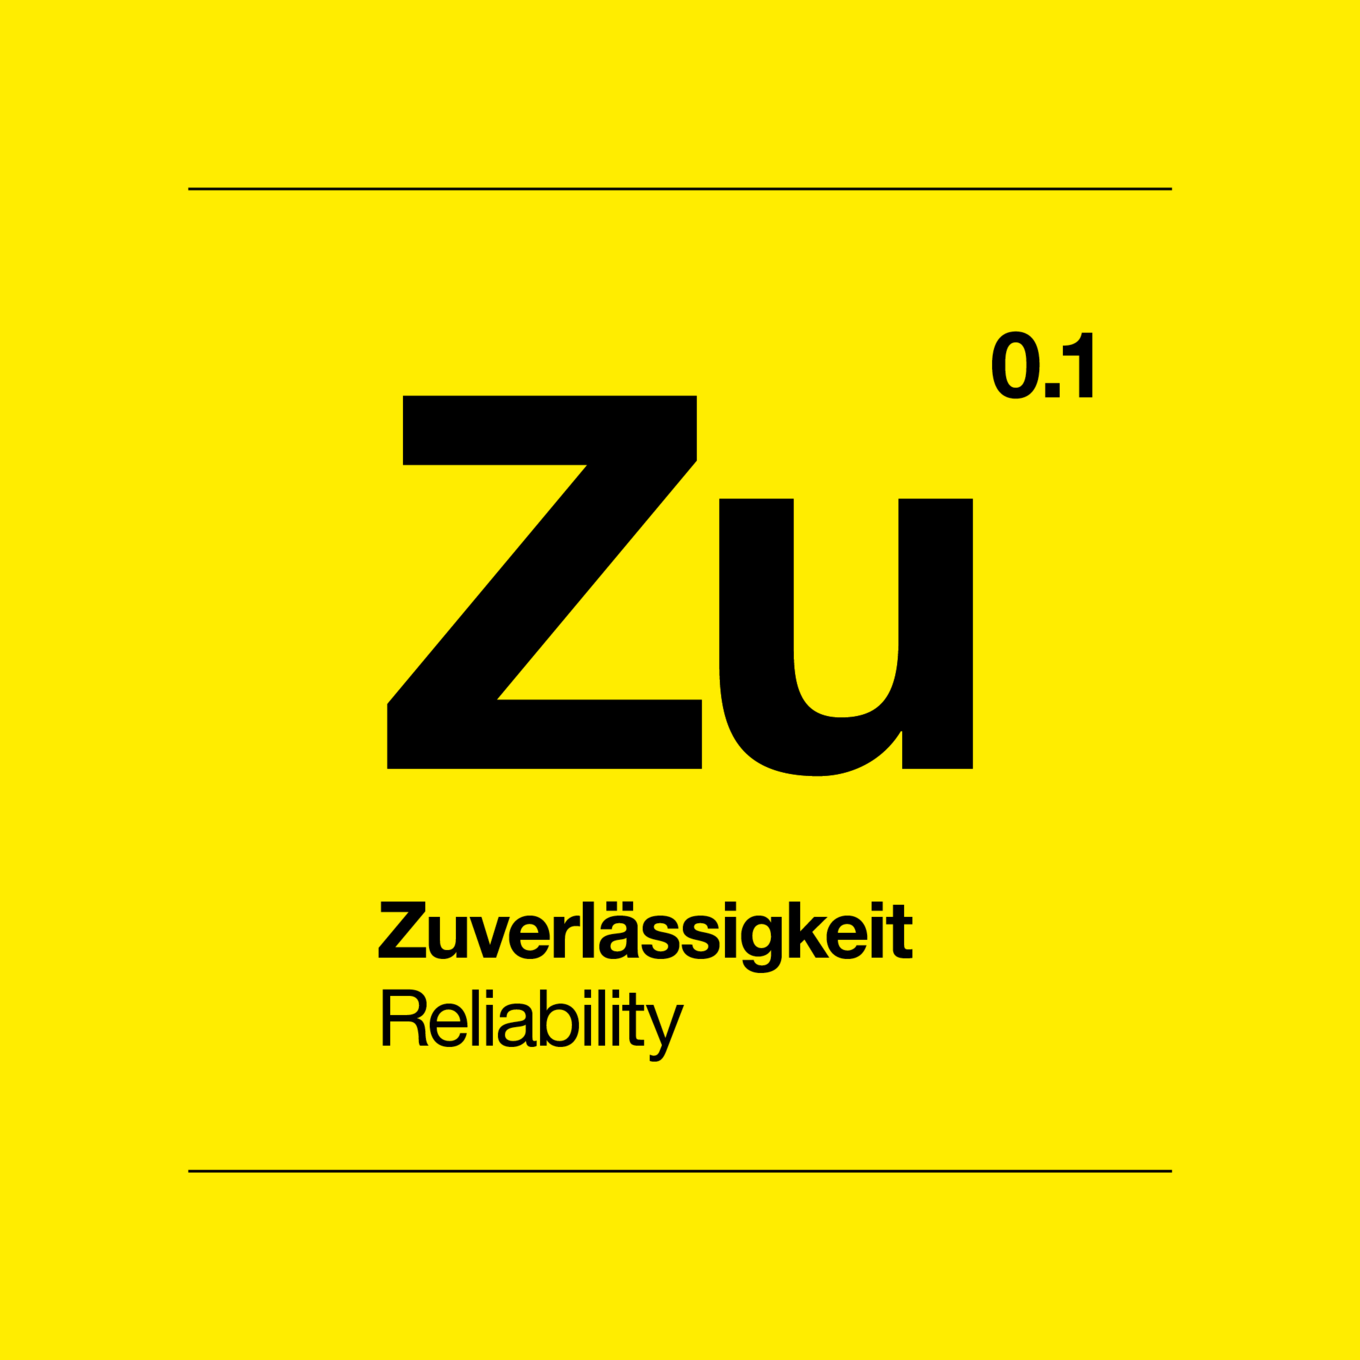 [Translate to Niederländisch:] Icon for value Reliability